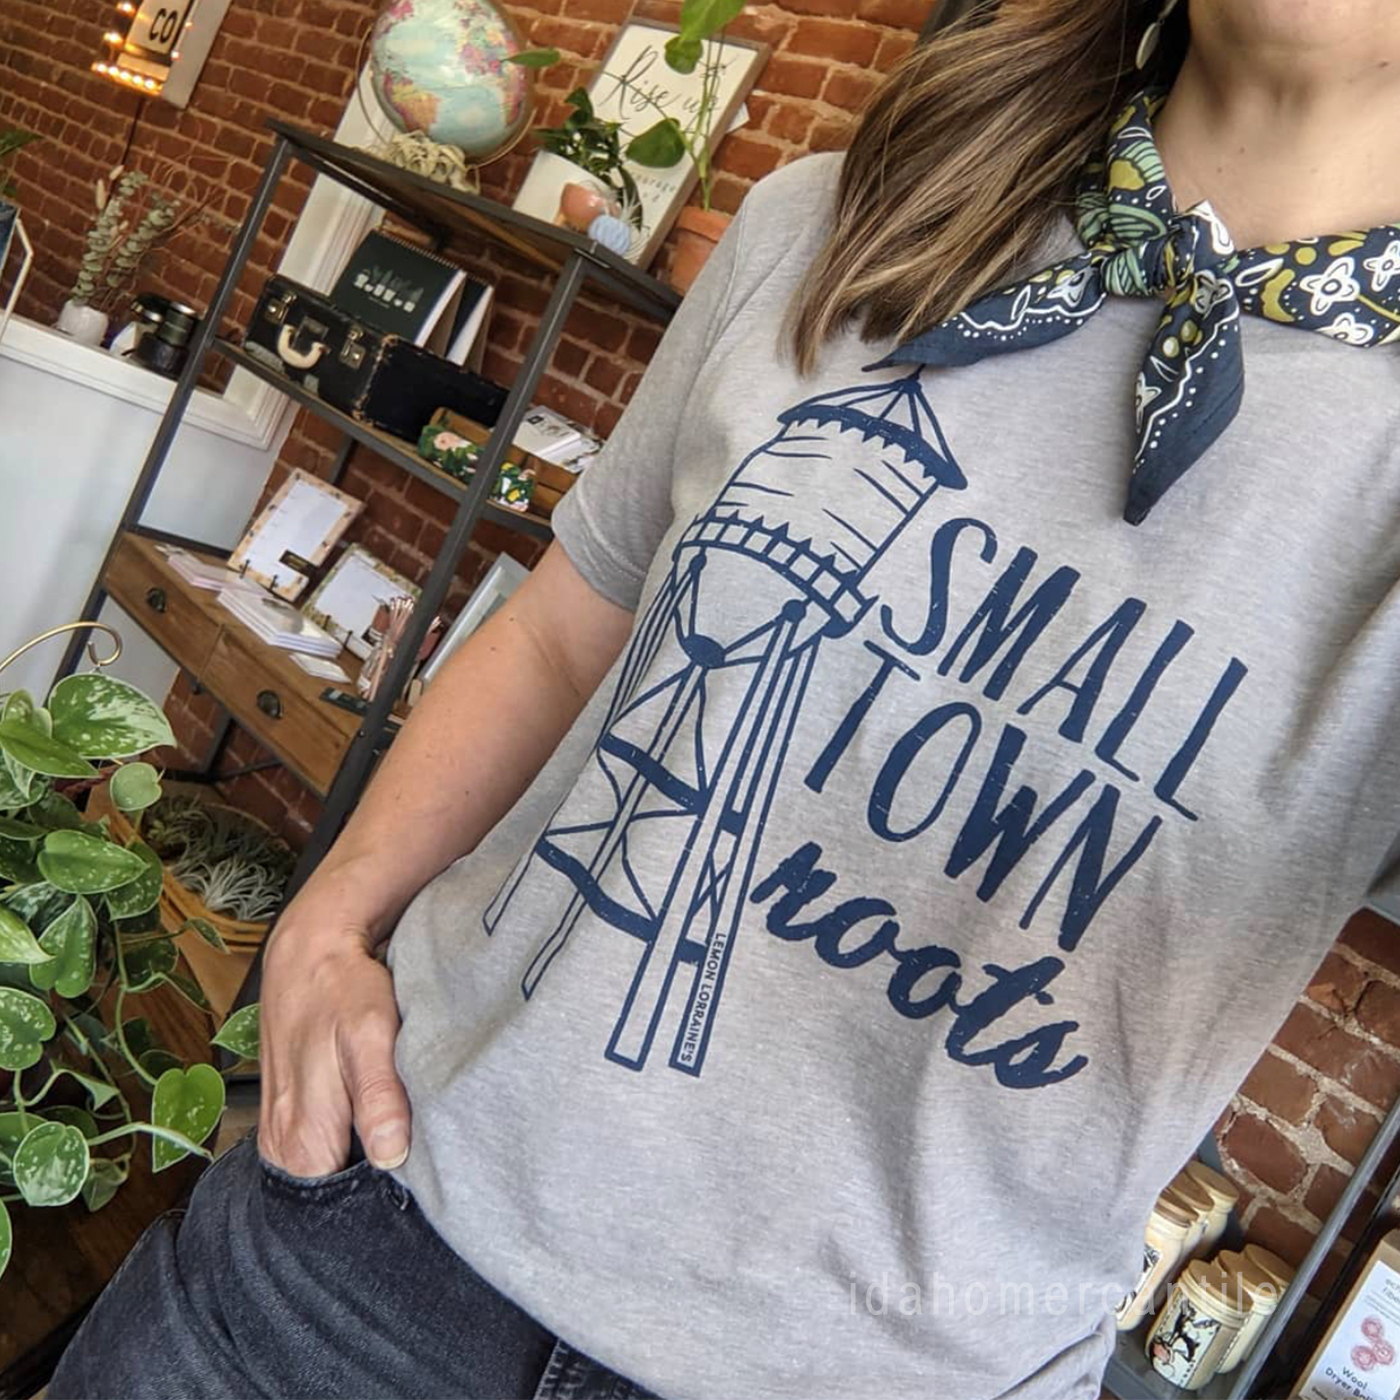 SMALL TOWN ROOTS Graphic Tee - Forever Western Boutique